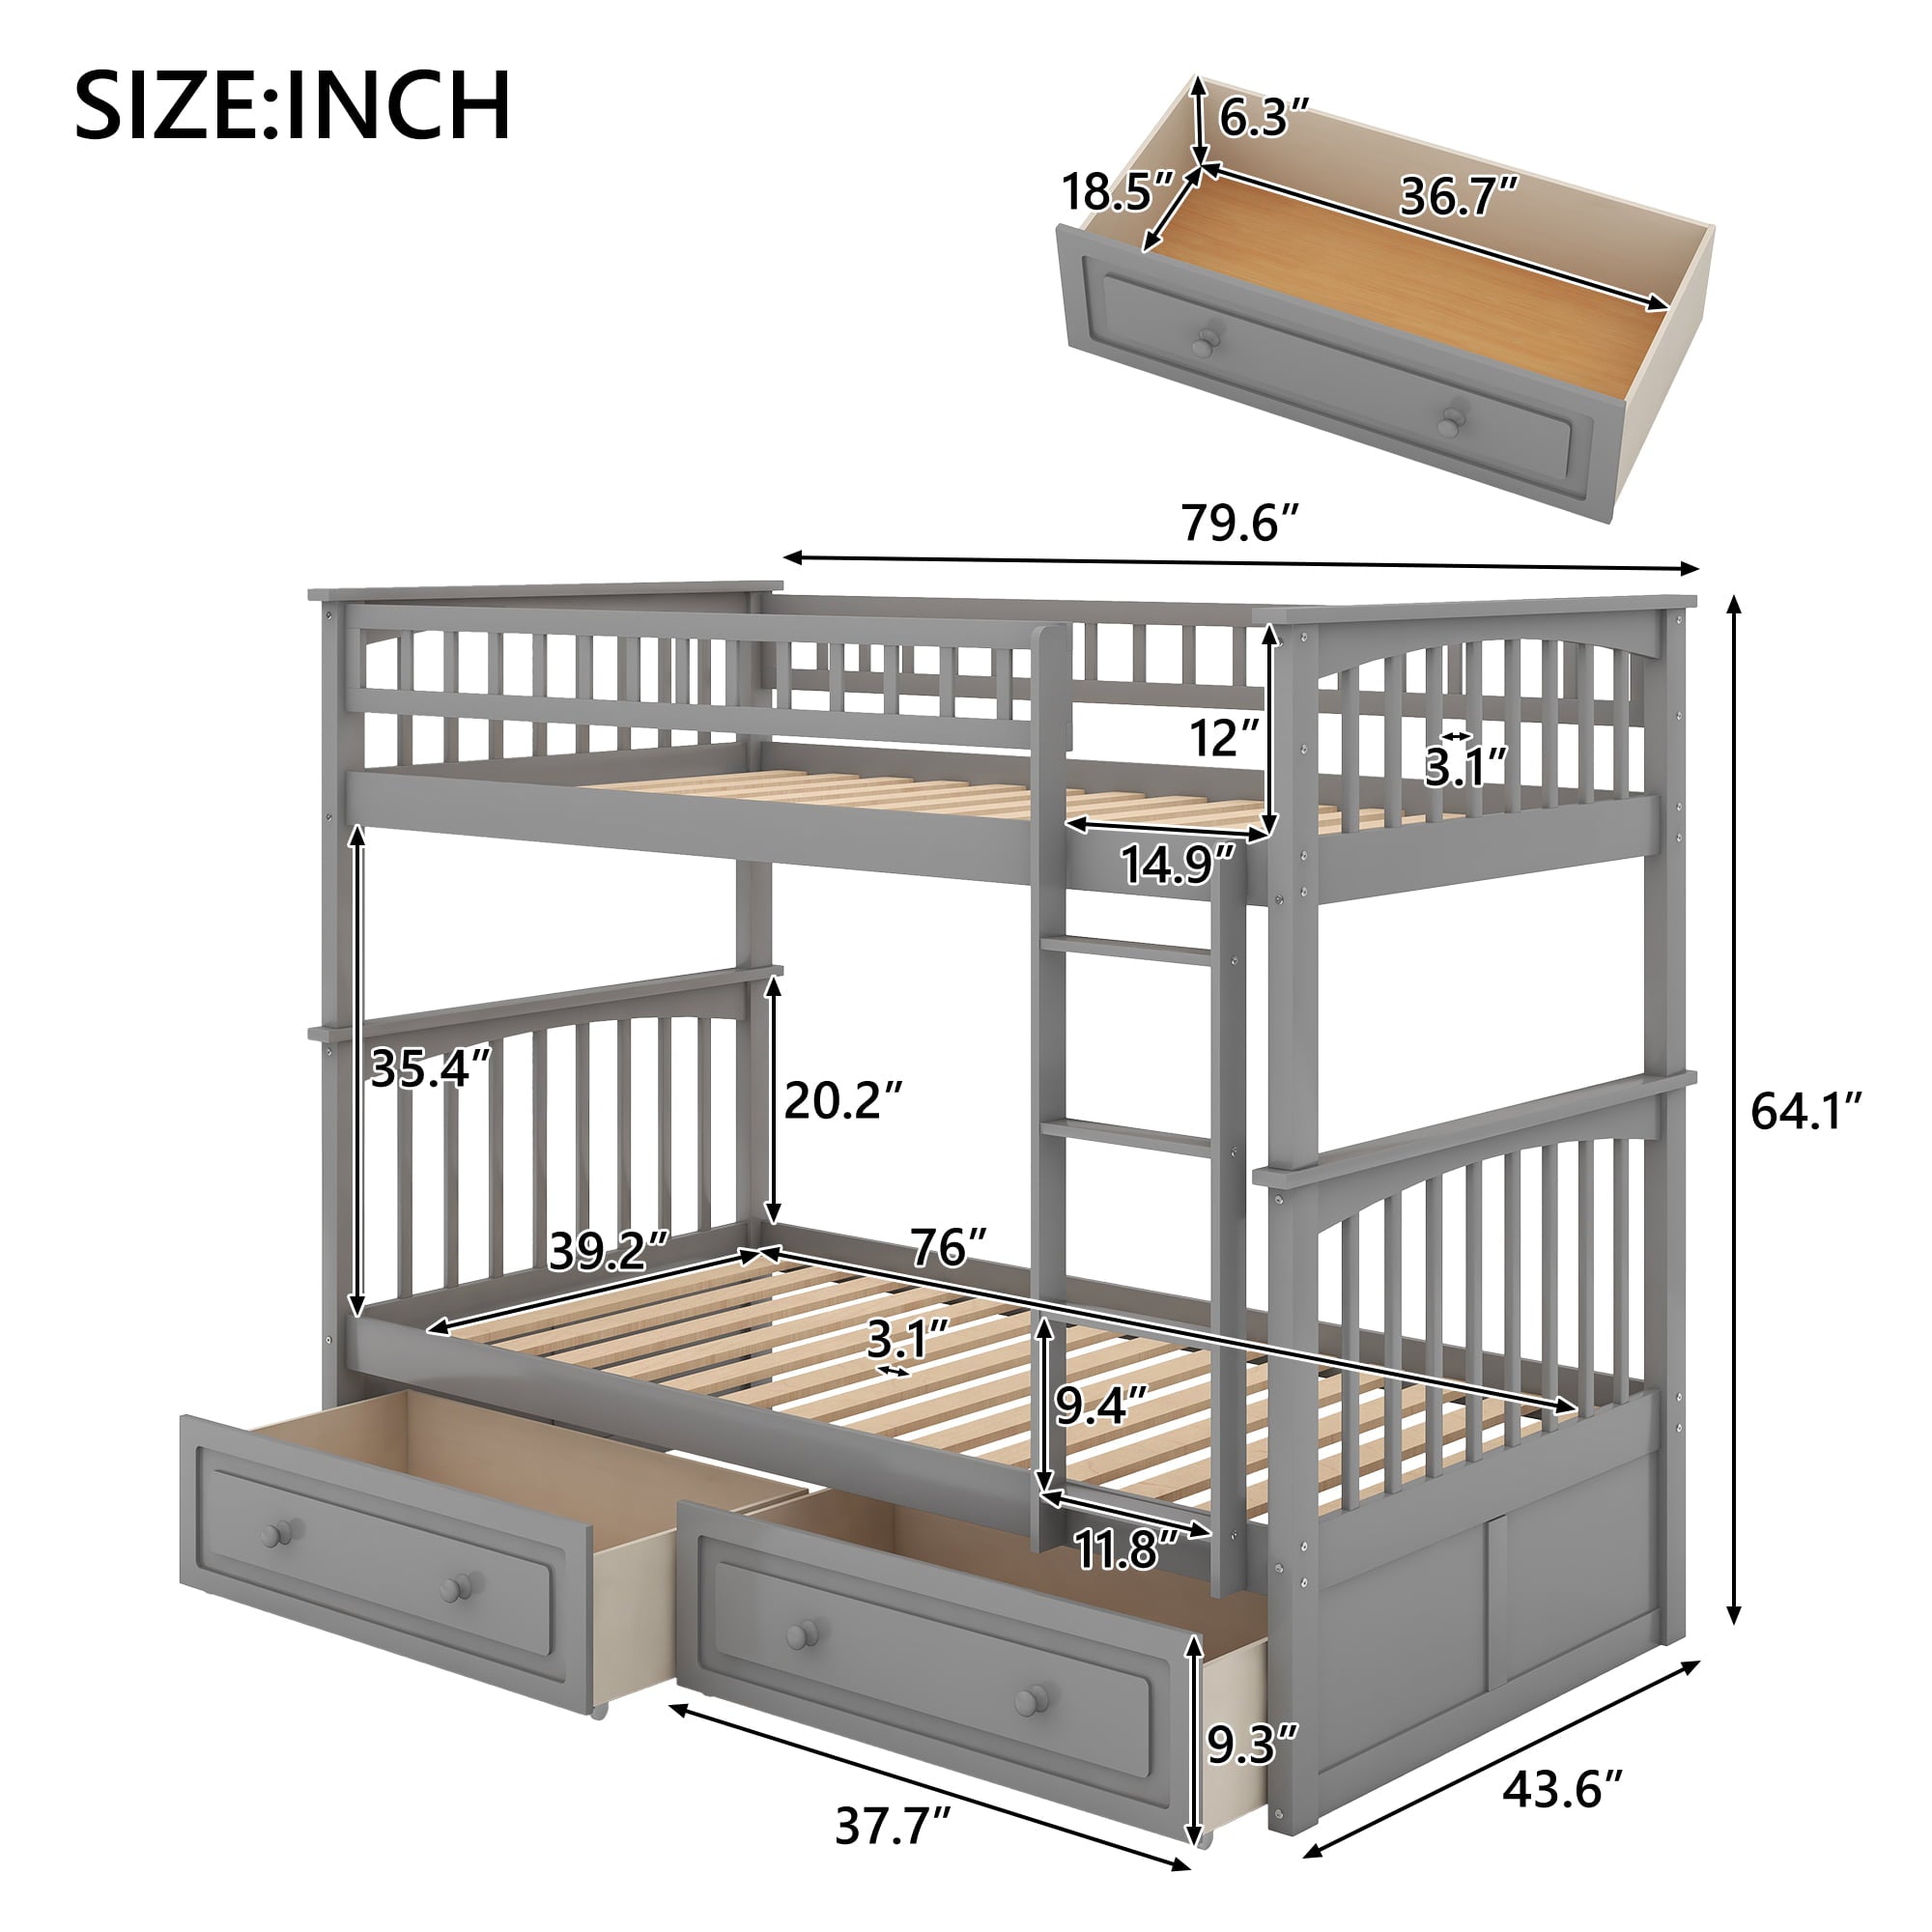 Euroco Pine Wood Bunk Bed With Storage, Twin-Over-Twin, Gray